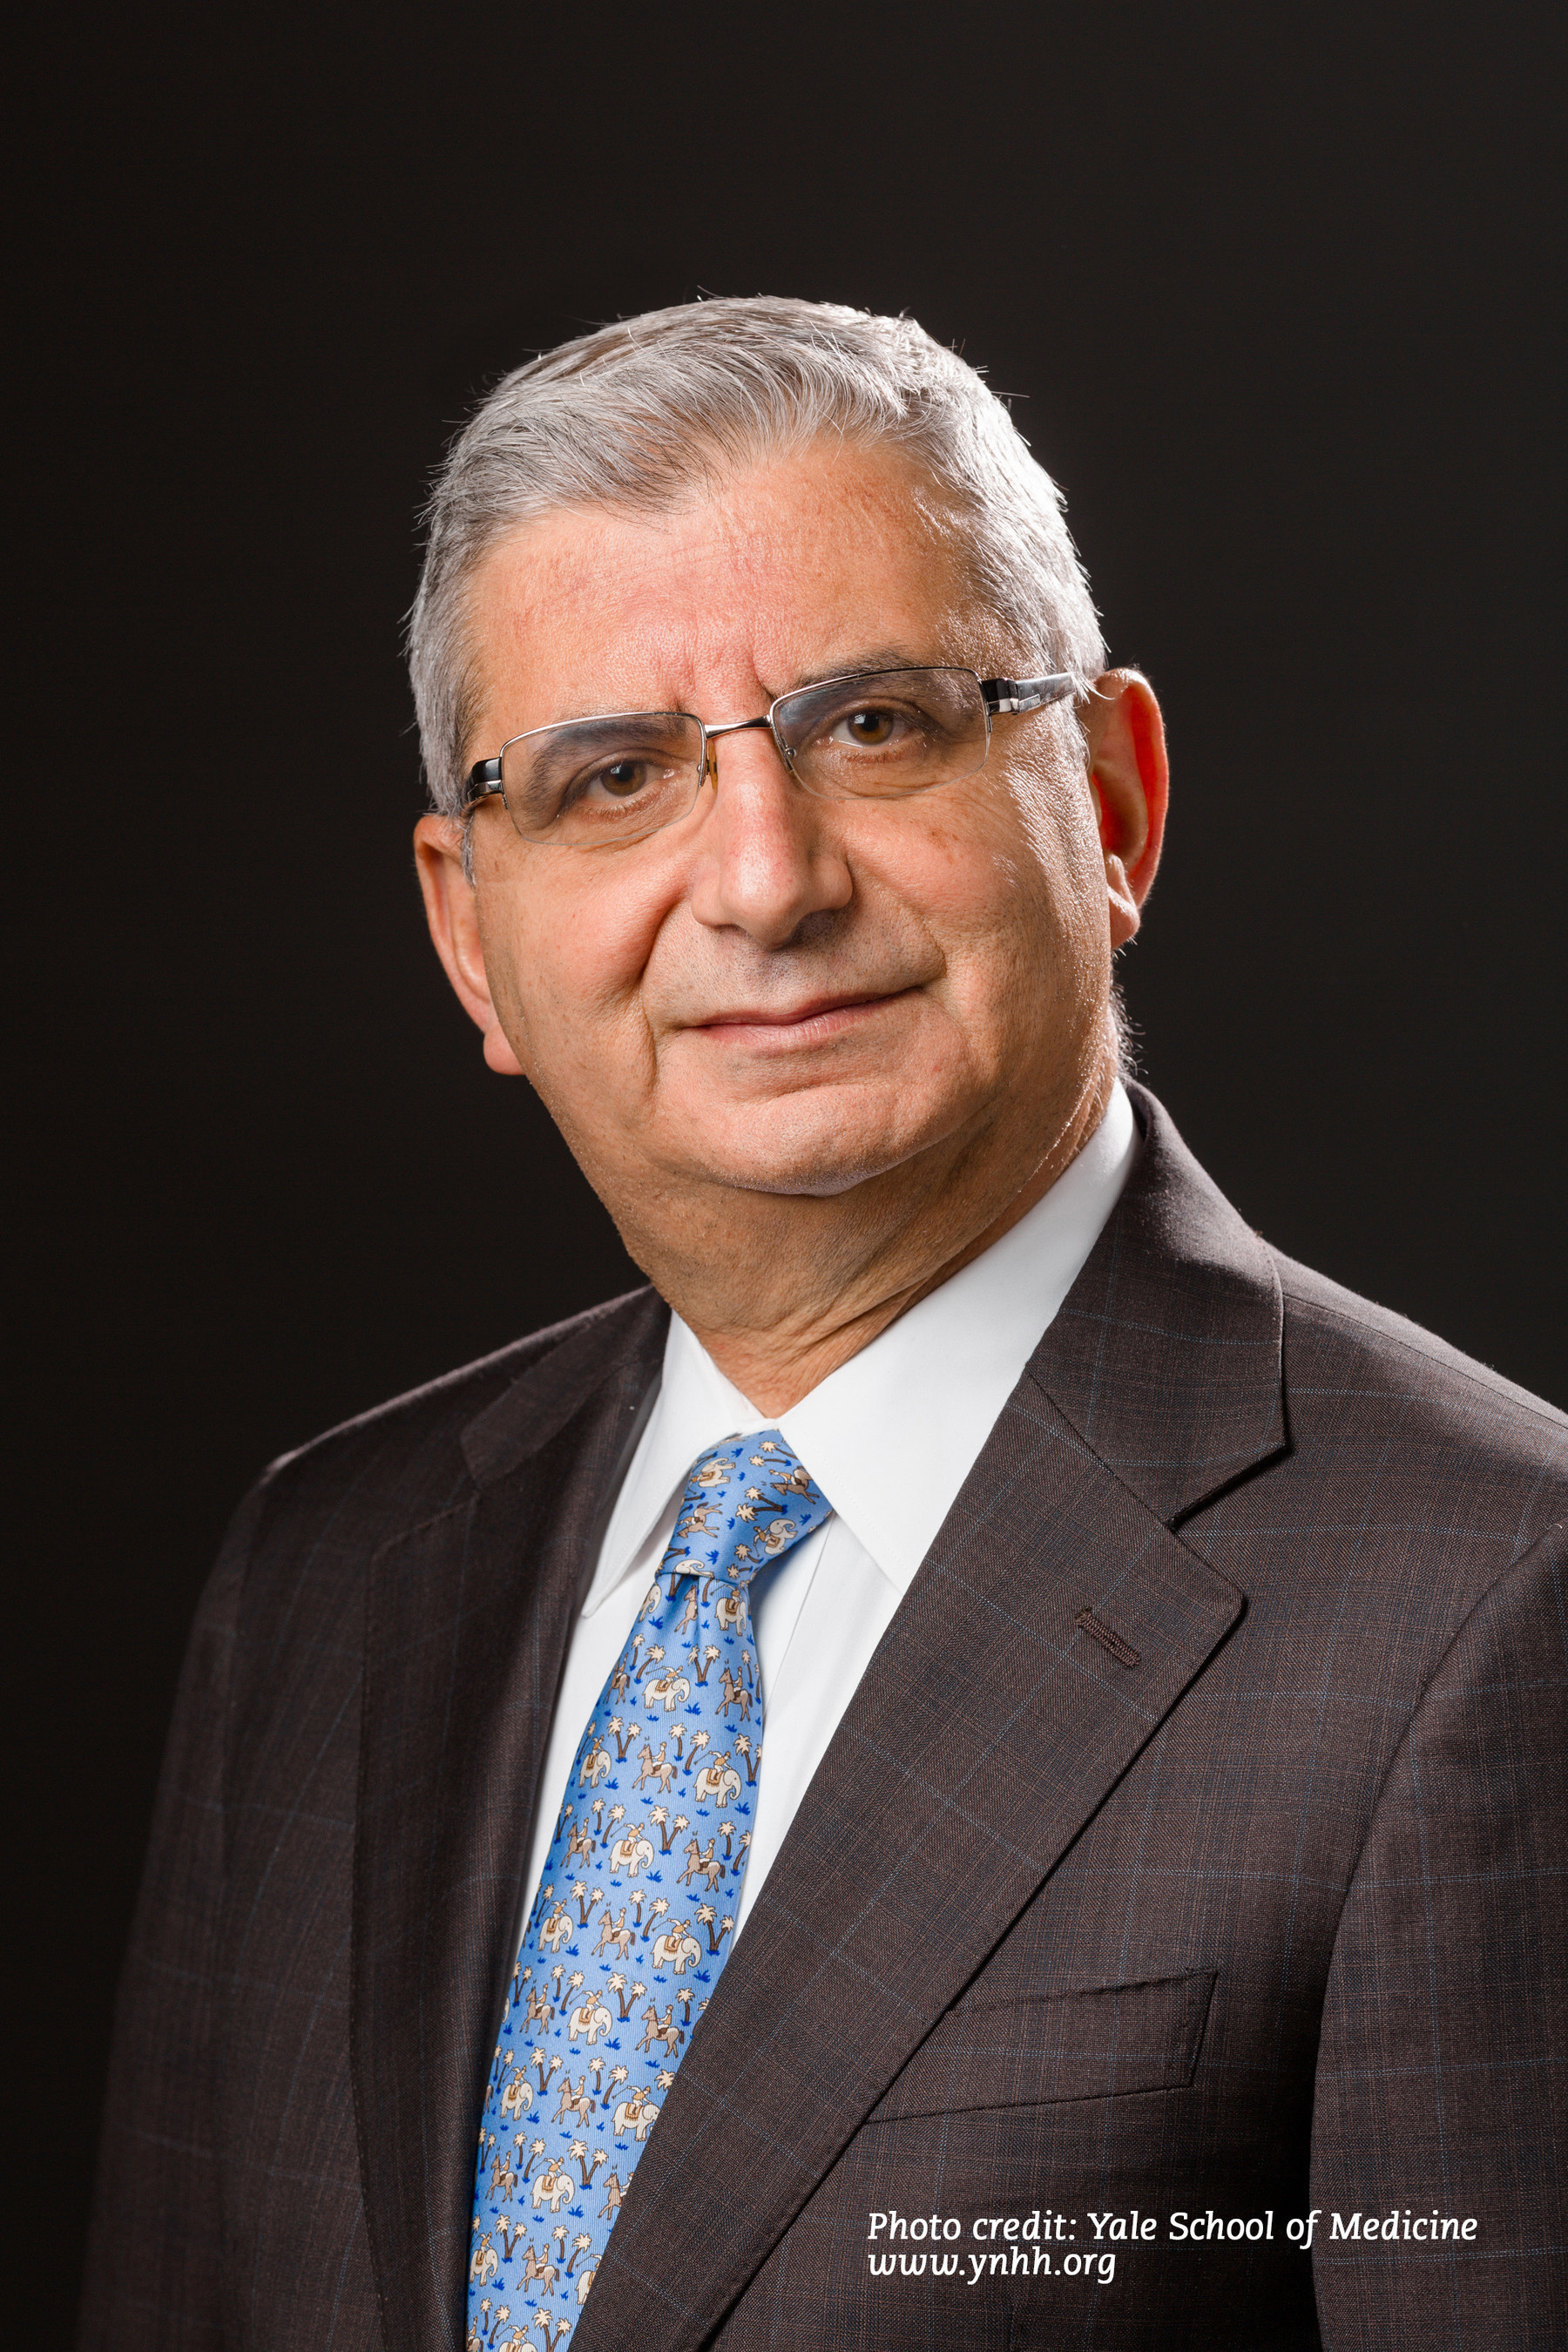 Hashim Sabet, MD, appointed Co-Physician in Chief, Hartford HealthCare Heart and Vascular Institute